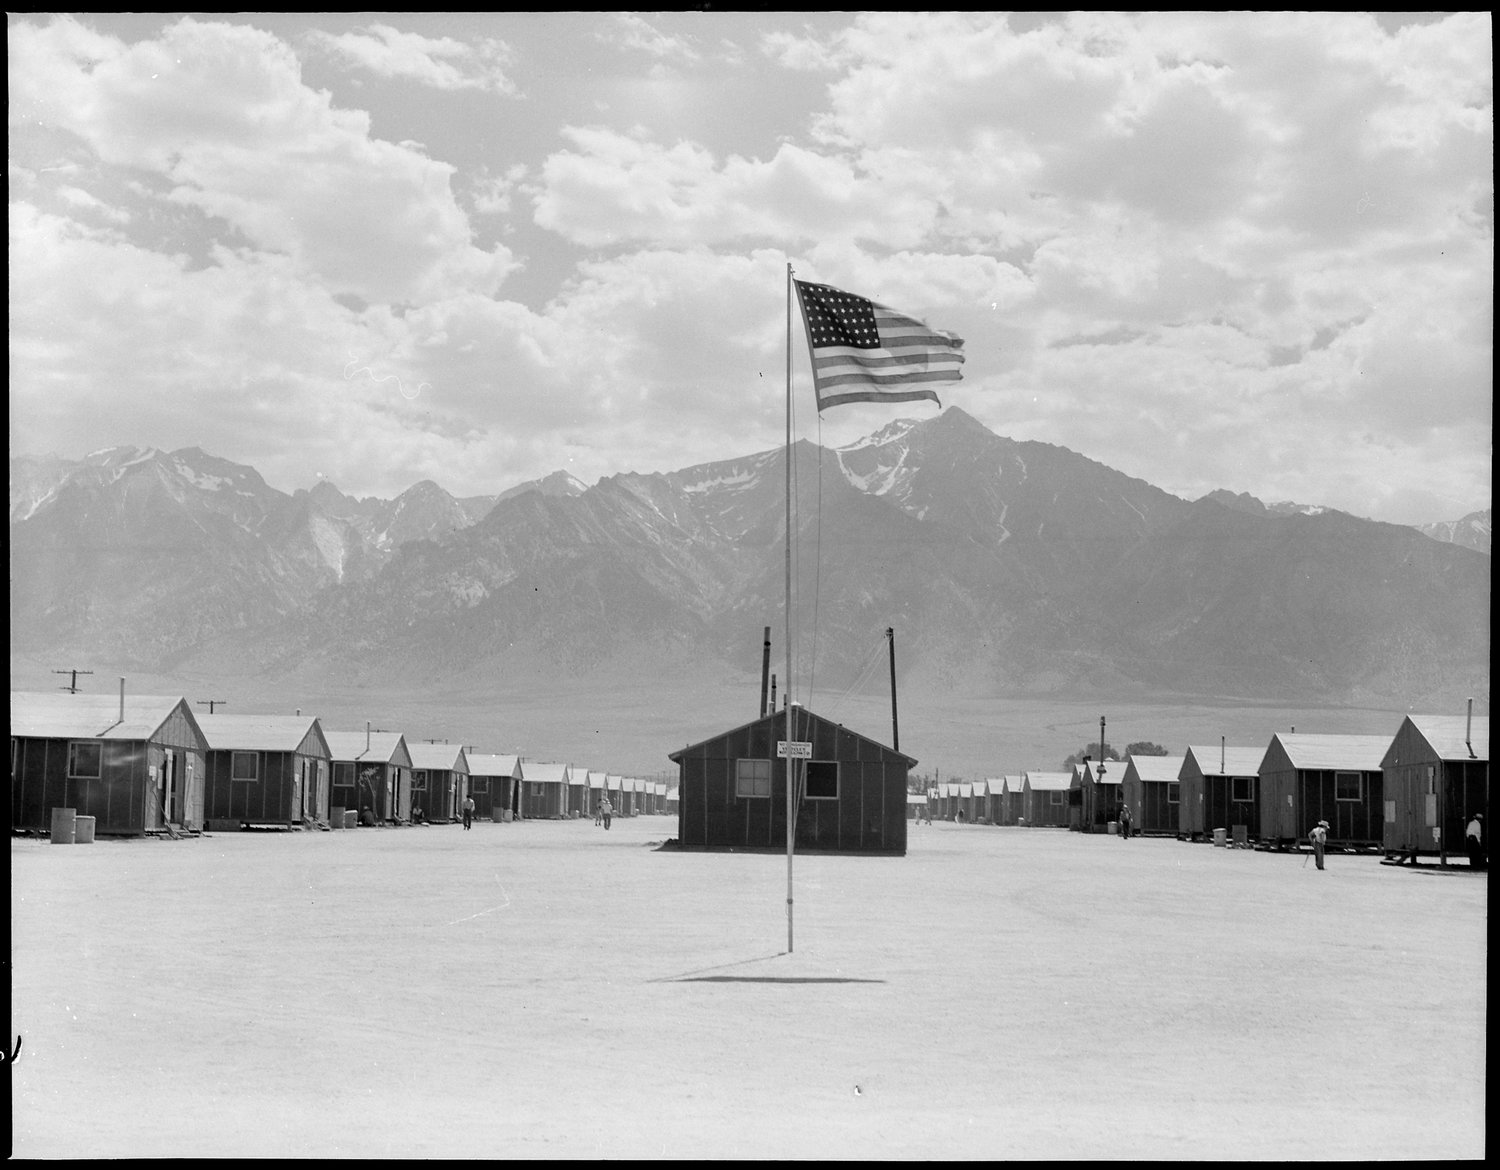 Manzanar Relocation Center, Manzanar, California. Street scene of barrack homes at this War Relocation Authority Center. The windstorm has subsided and the dust has settled.